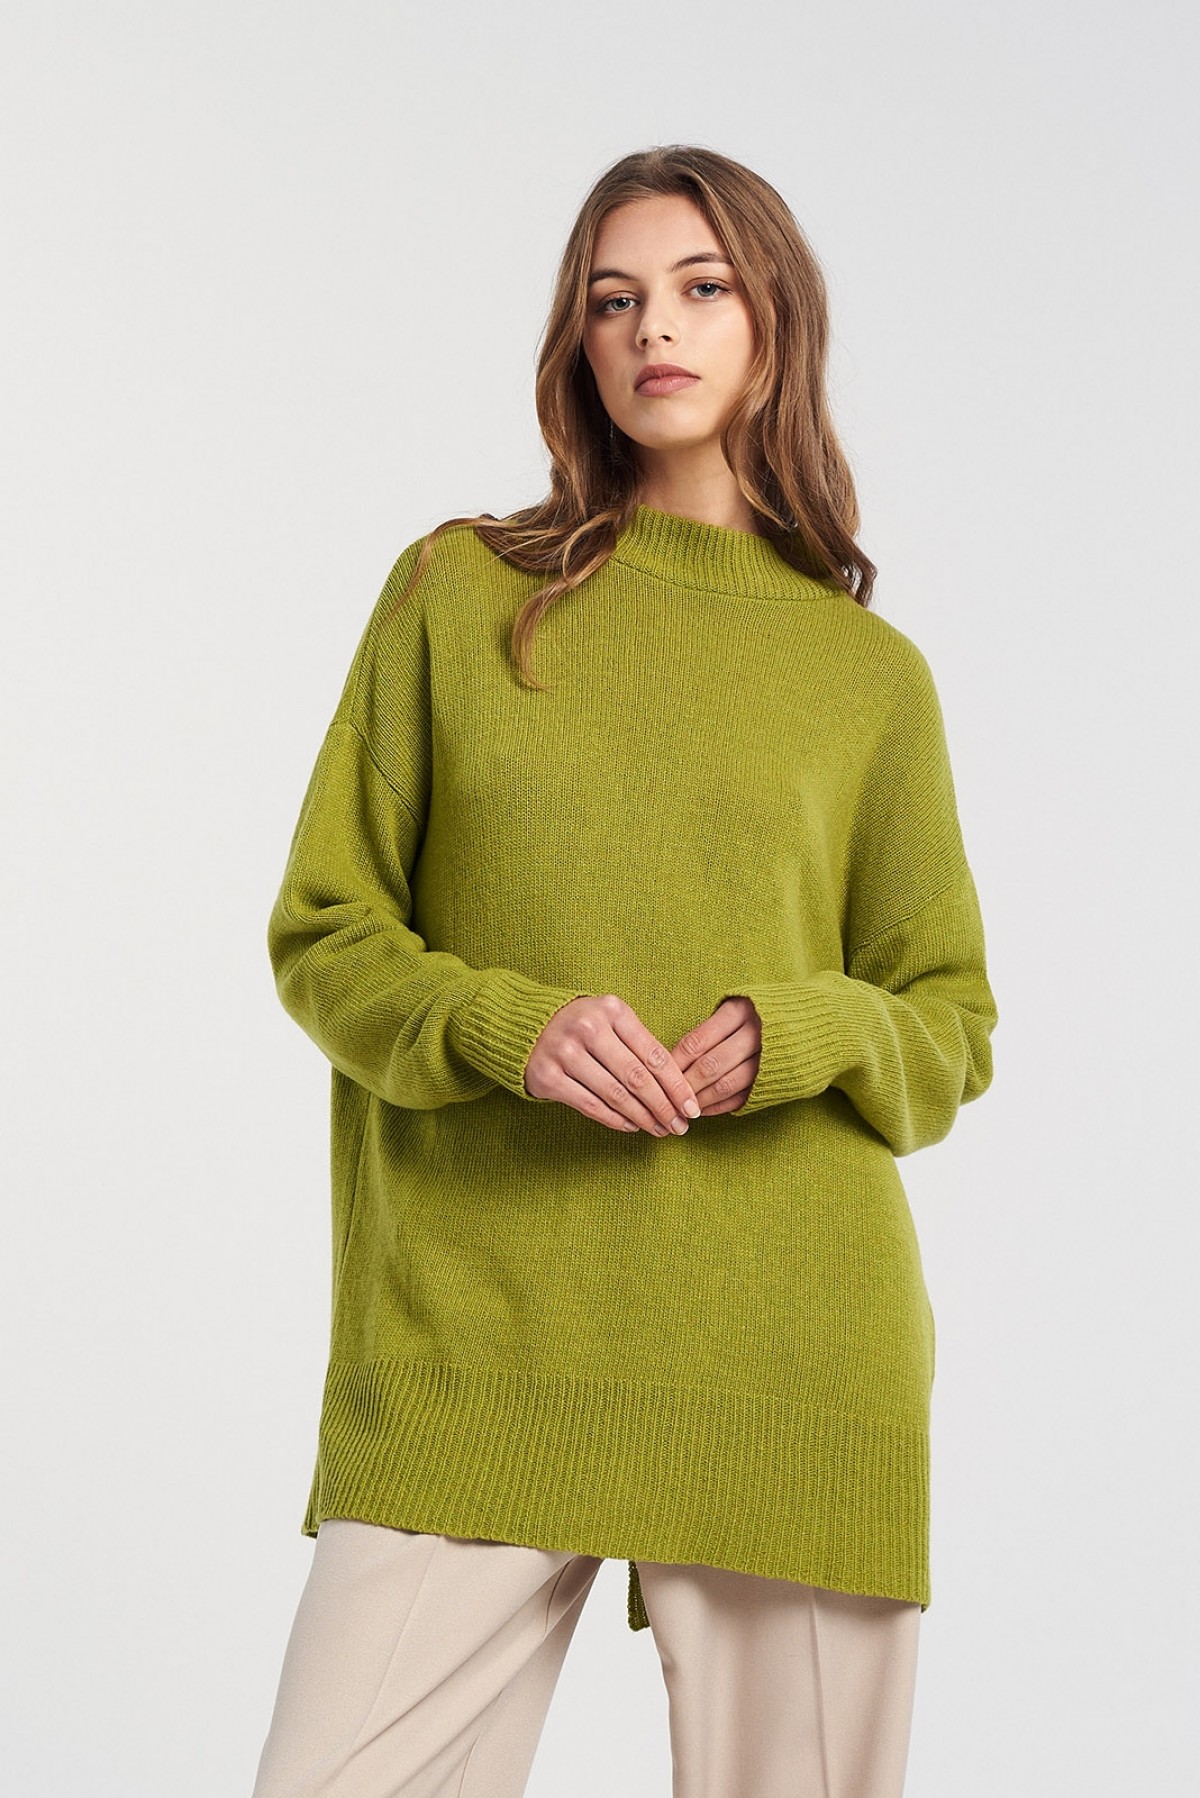 CHRISTELLE NIMA CASHMERE LONG OPEN BACK BLOUSE IN OLIVE GREEN